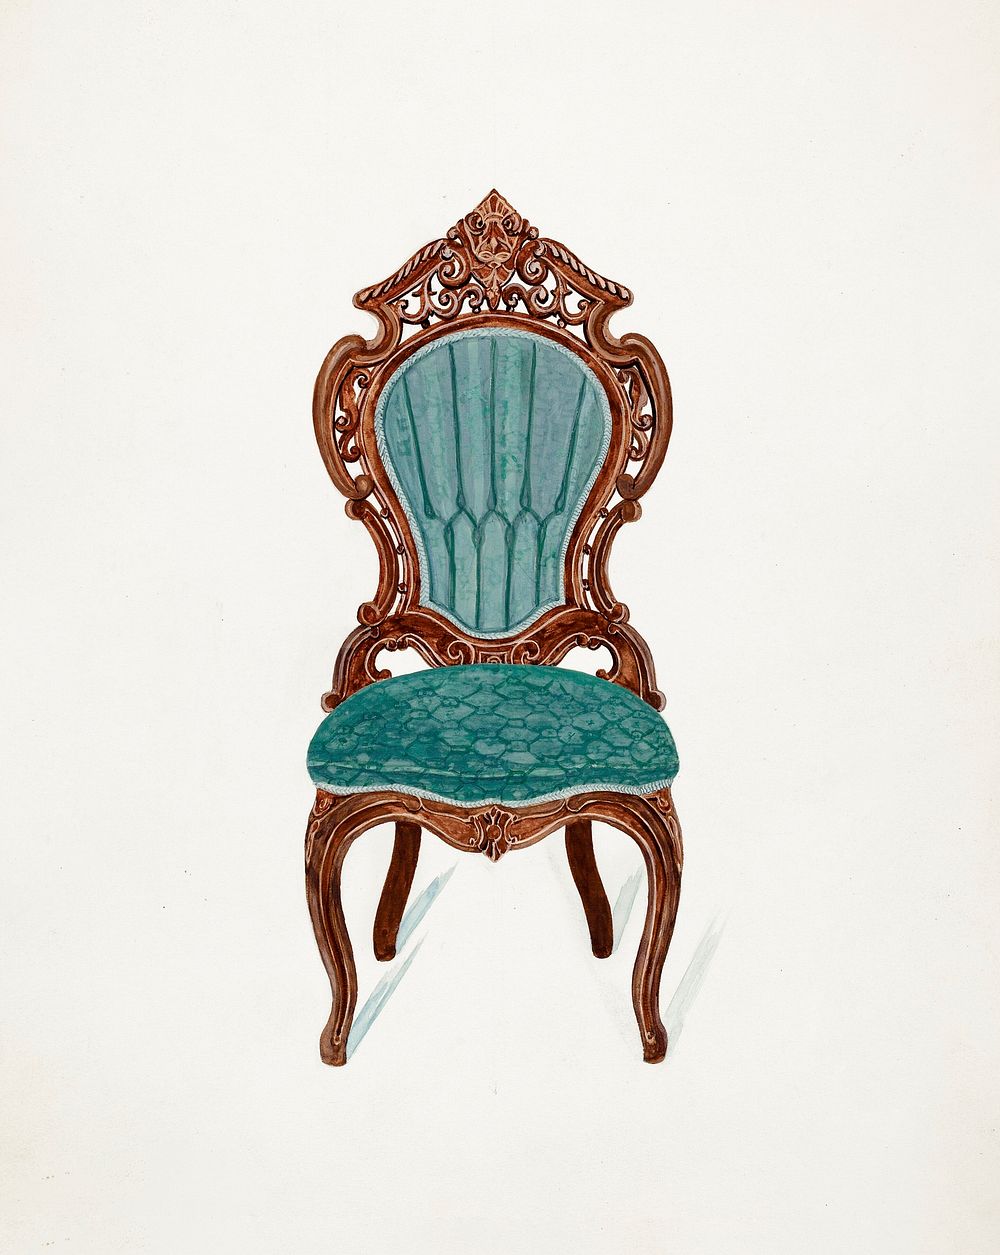 Rosewood Chair (ca. 1936) by Rex F. Bush. Original from The National Gallery of Art. Digitally enhanced by rawpixel.